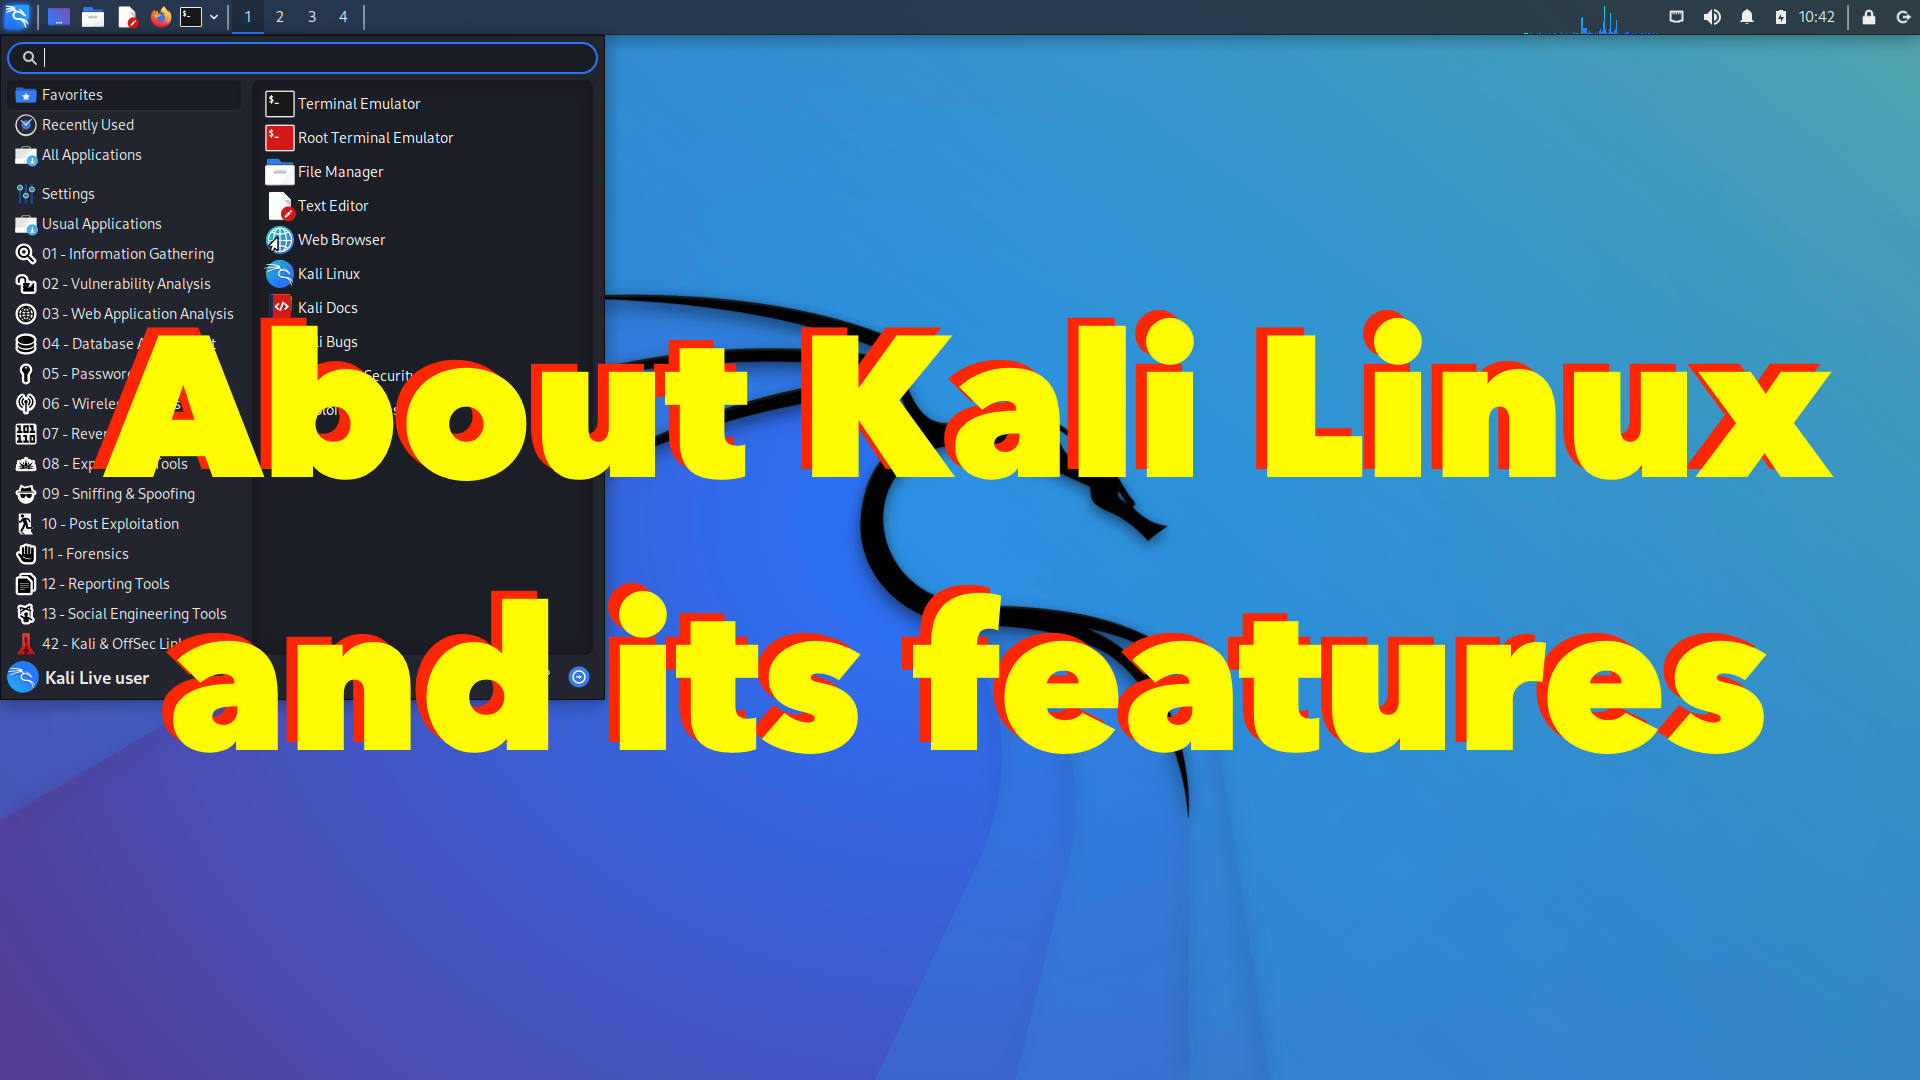 About Kali Linux and its features